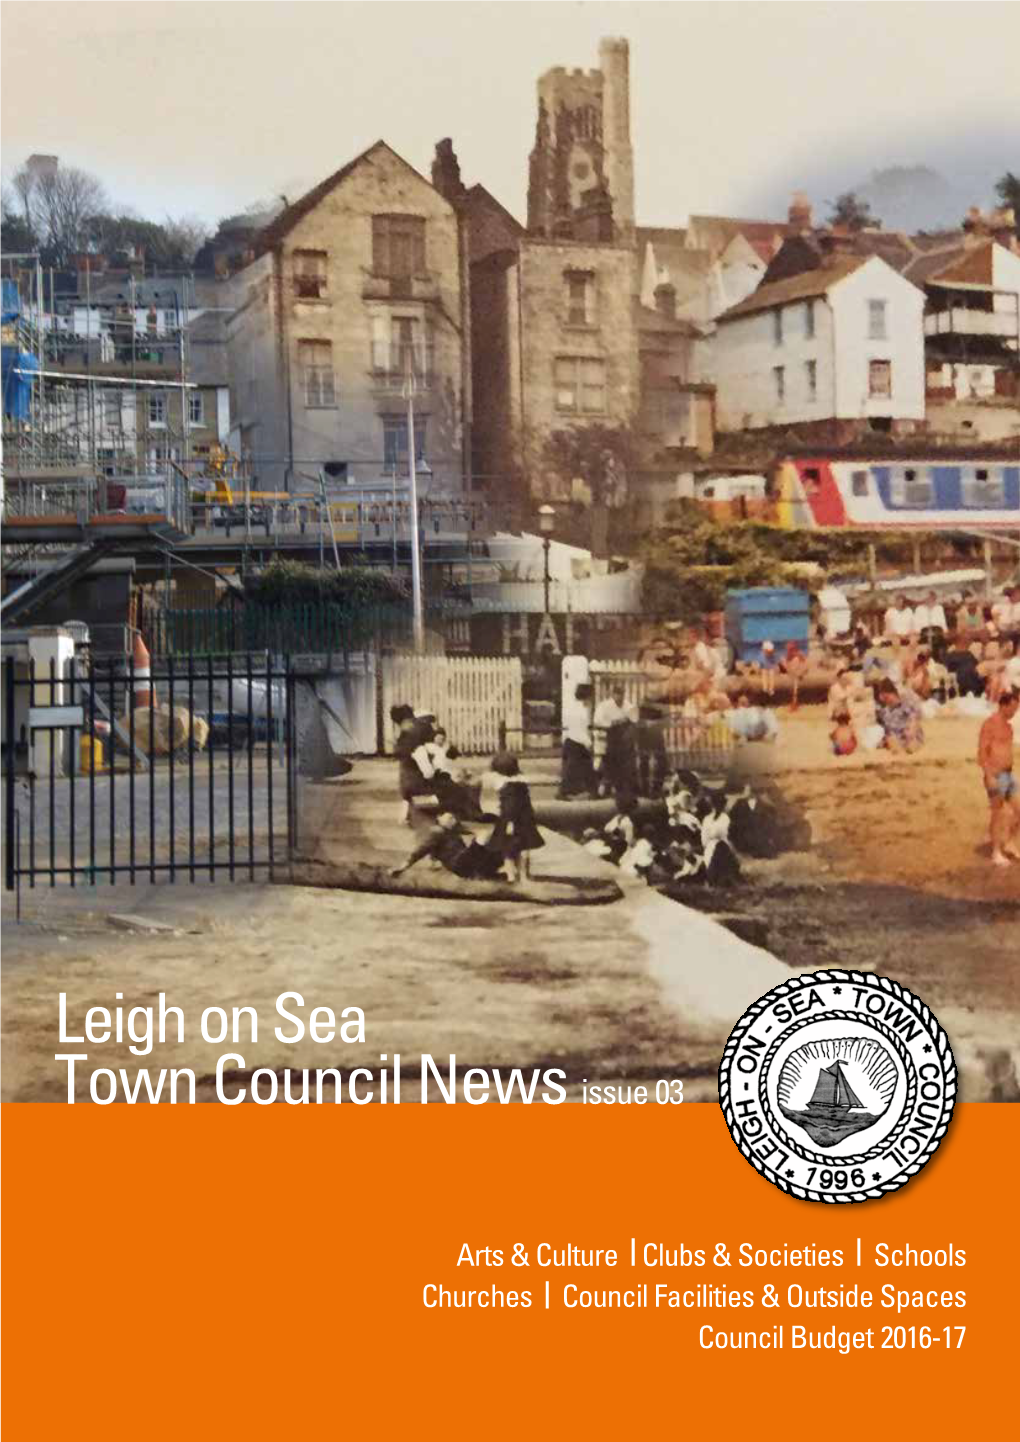 Leigh on Sea Town Council Newsissue 03